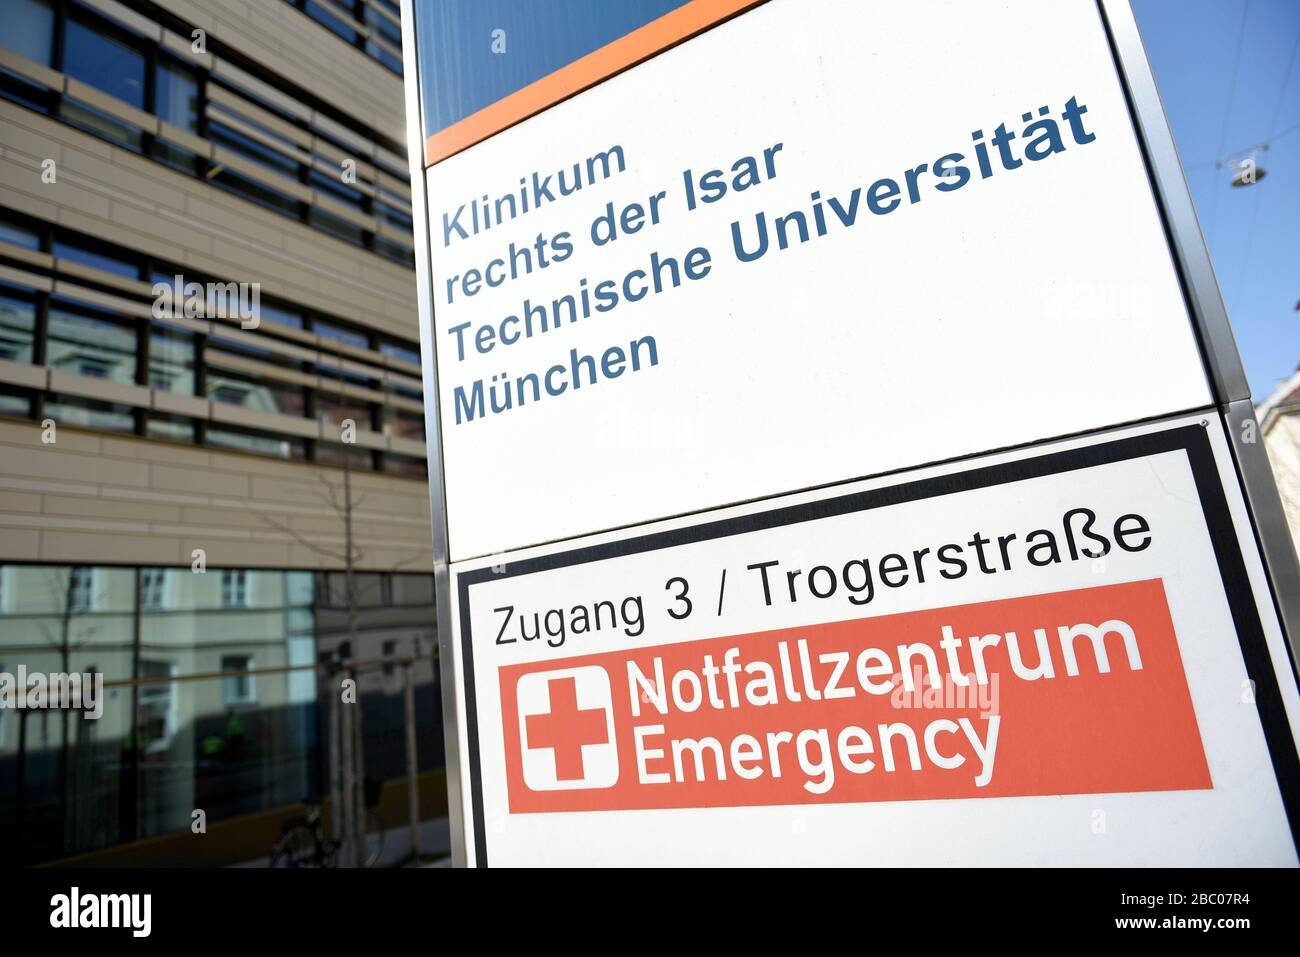 Klinikum Rechts der Isar of the Technical University of Munich (TUM), admitted at the time of the corona epidemic. [automated translation] Stock Photo